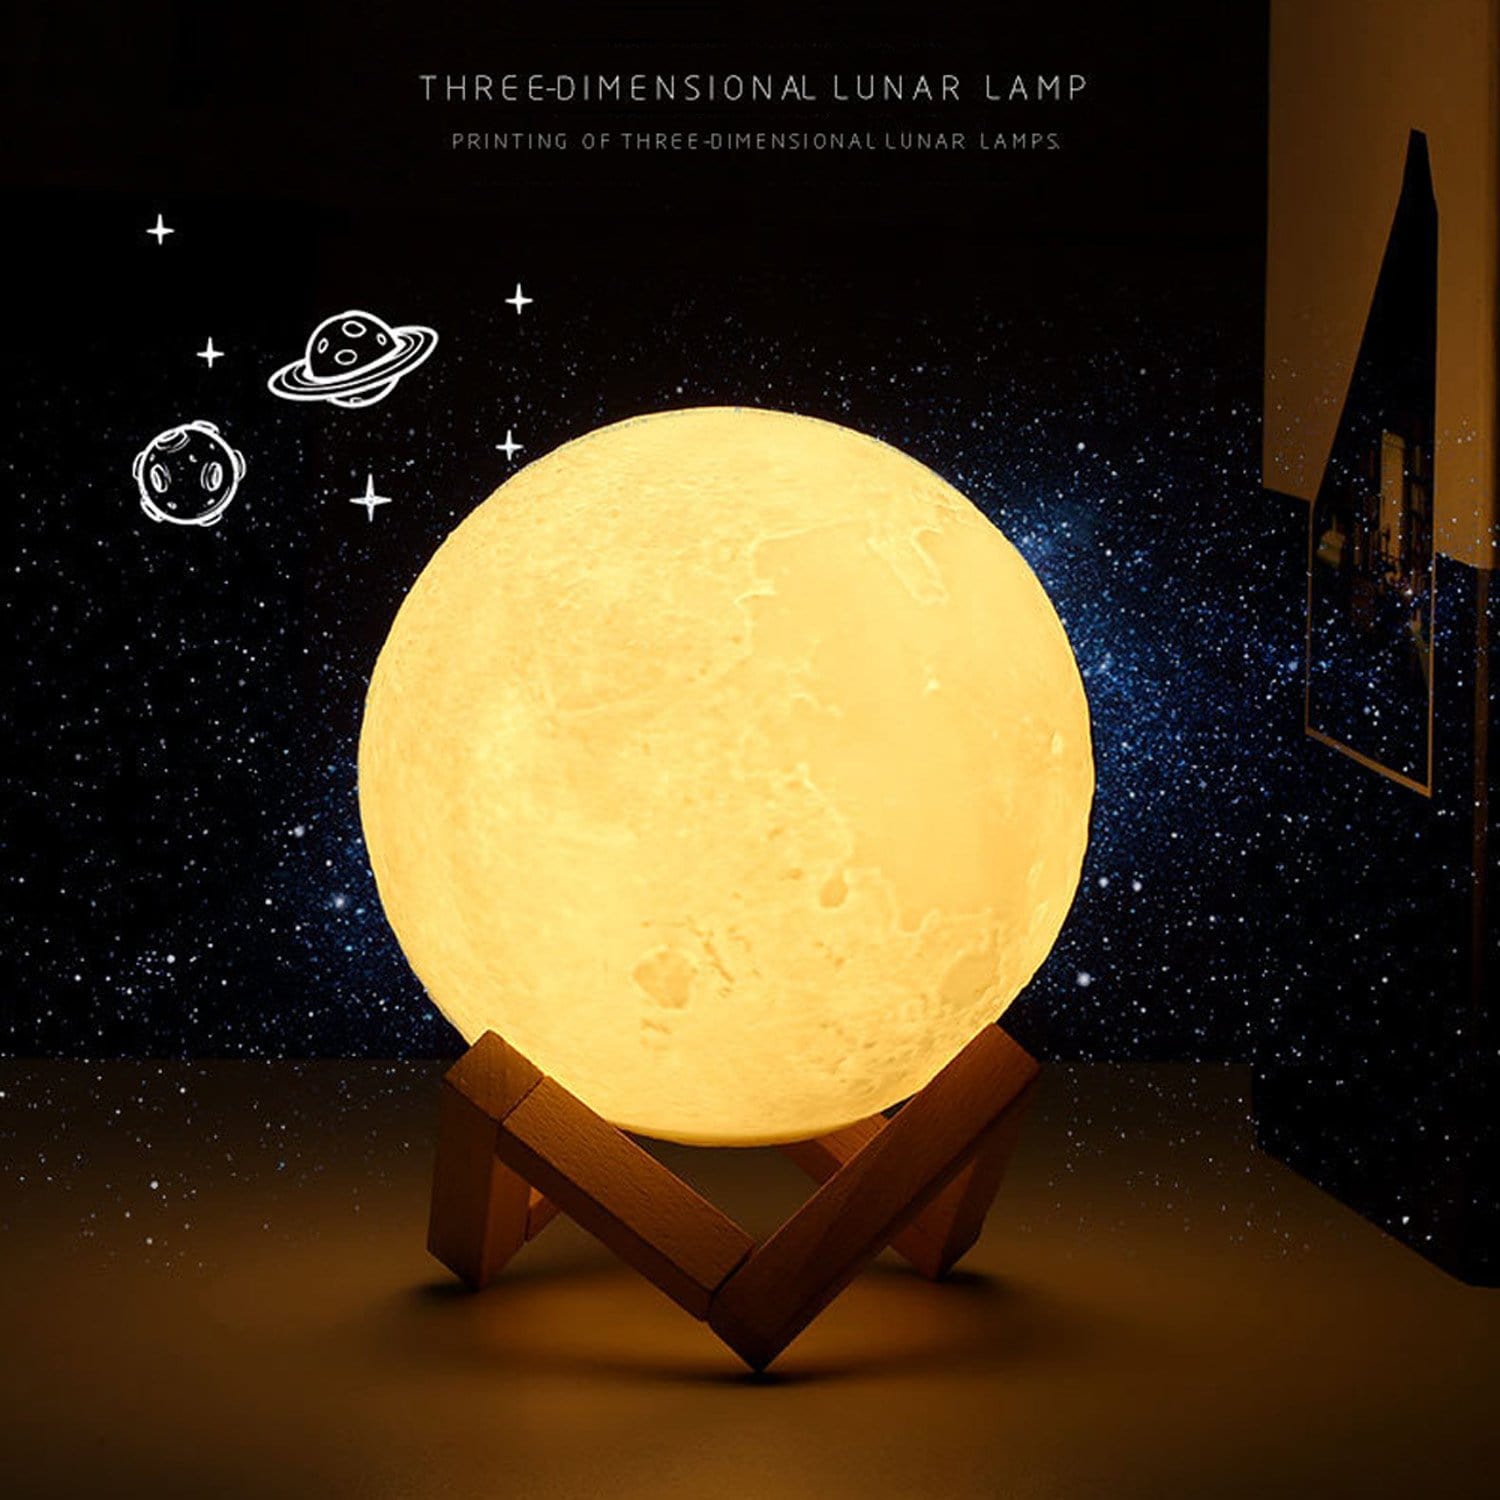 Moon Lamp To My Wife Marrying You Is The Best Decision - 3D LED Engraving Moon Lamp GiveMe-Gifts